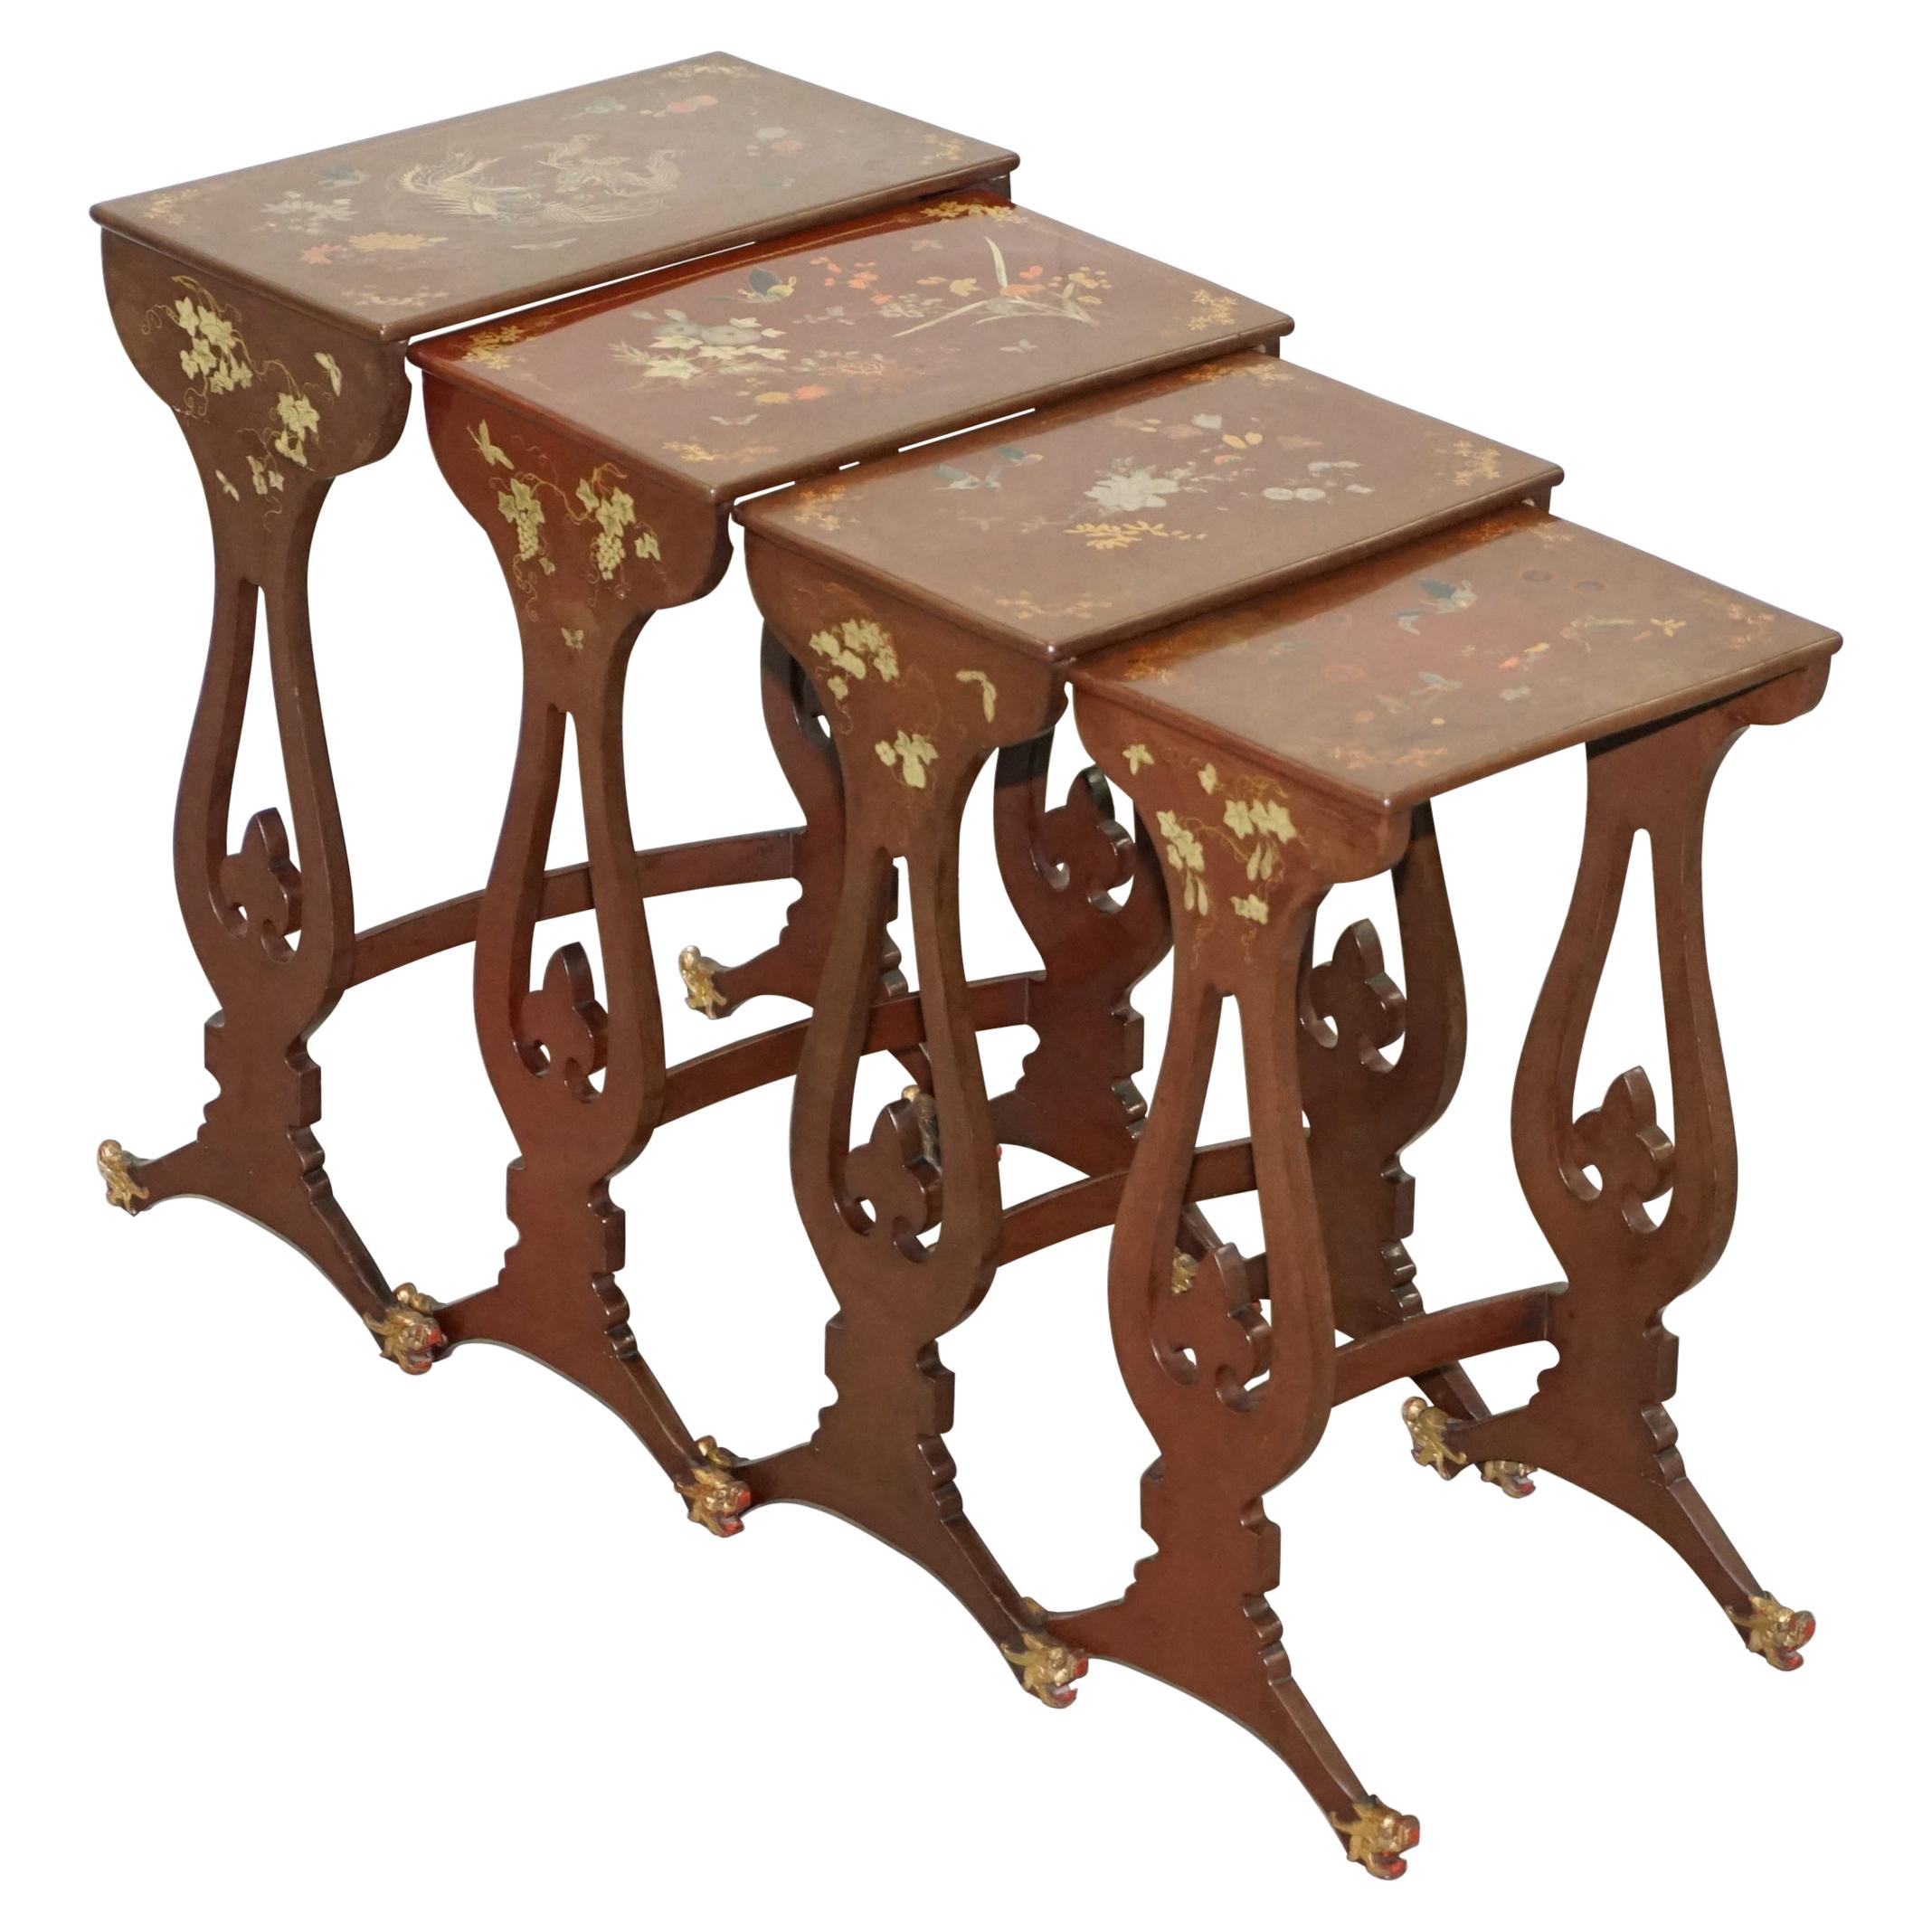 Sublim Nest of 4 circa 1880 Chinese Export Brown Lacqurered Tables Hand Painted